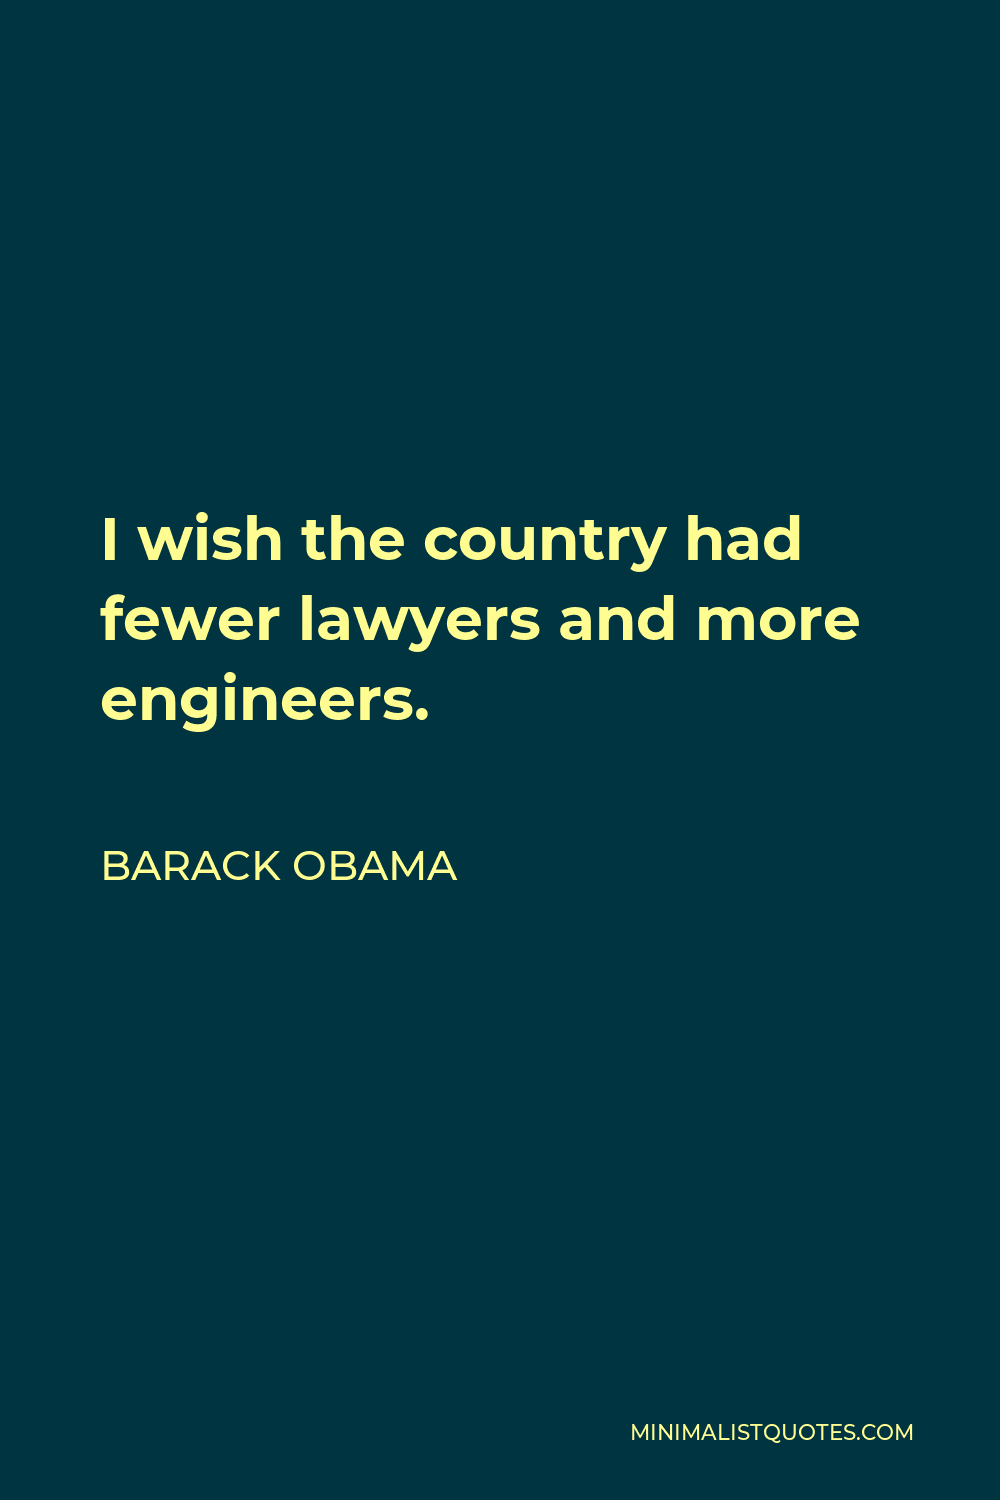 Barack Obama Quote - I wish the country had fewer lawyers and more engineers.